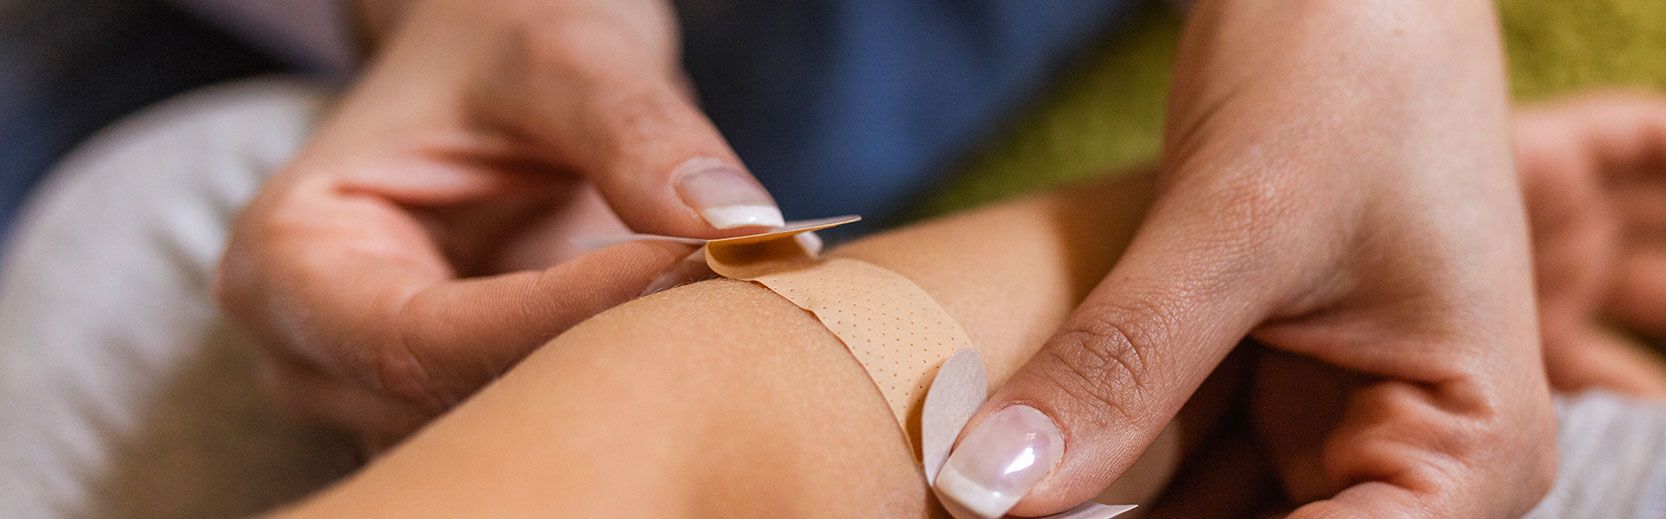 image of a bandaid being applied to an arm